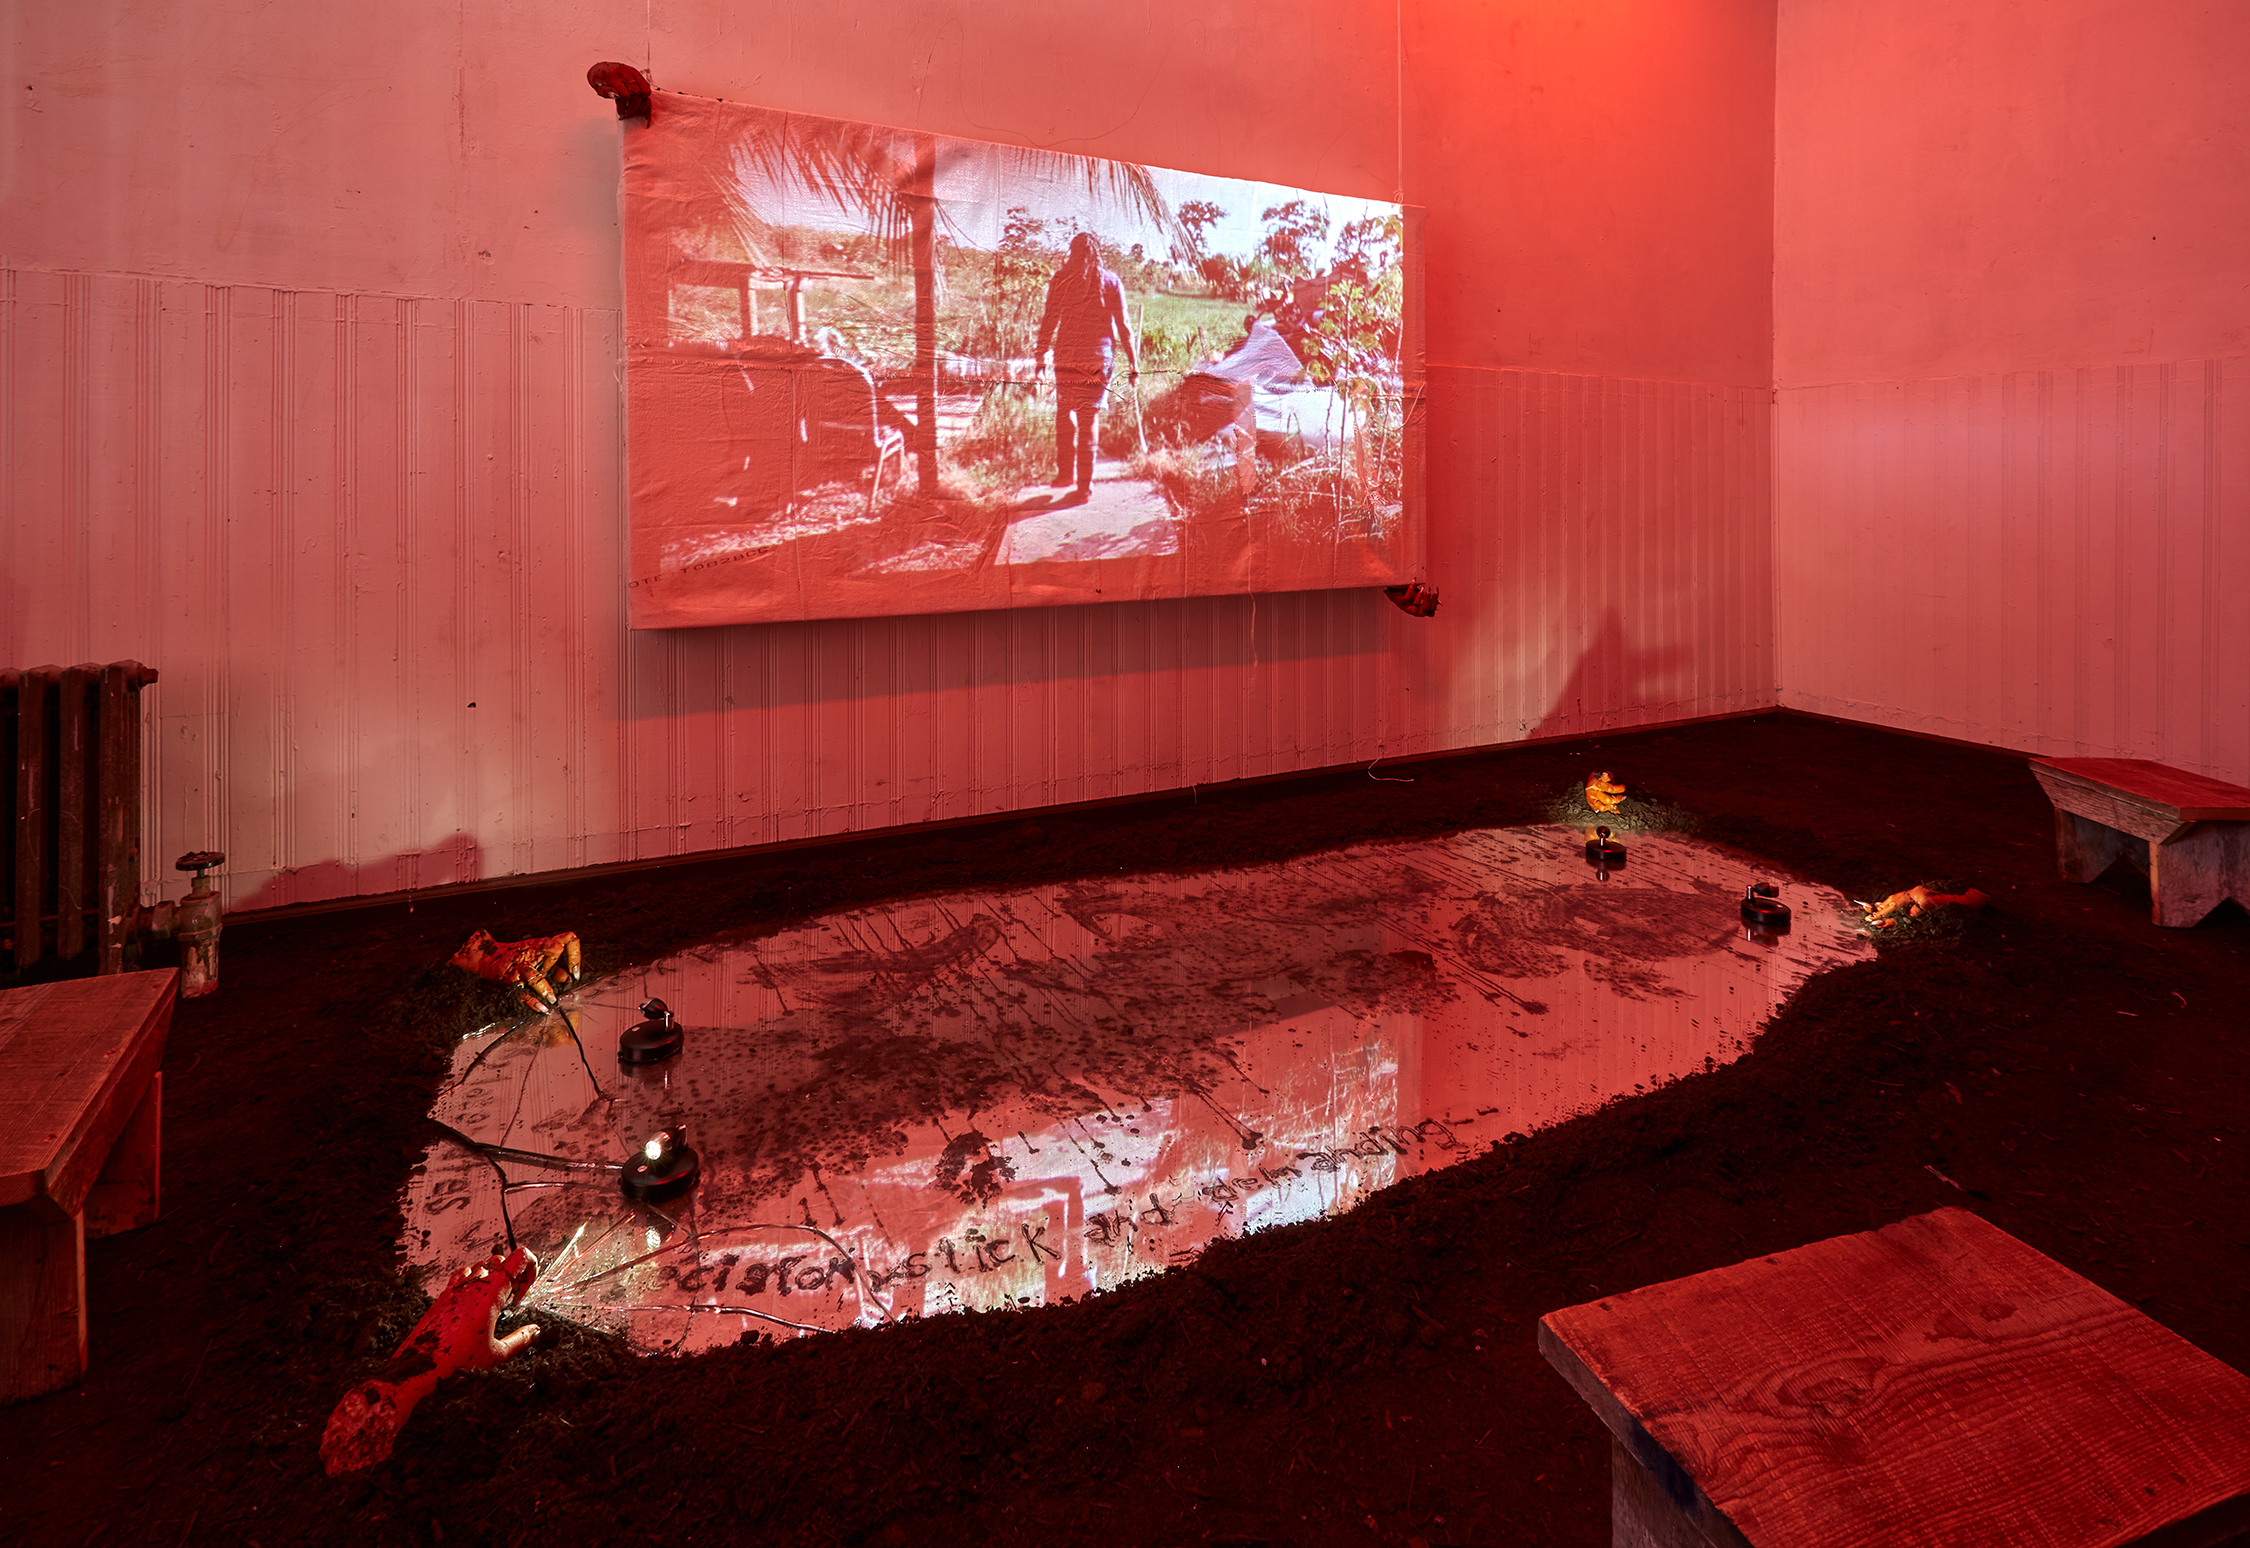 A video is projected in a darkened space awash with a soft red light. The floor is covered in dirt and a cracked mirror.